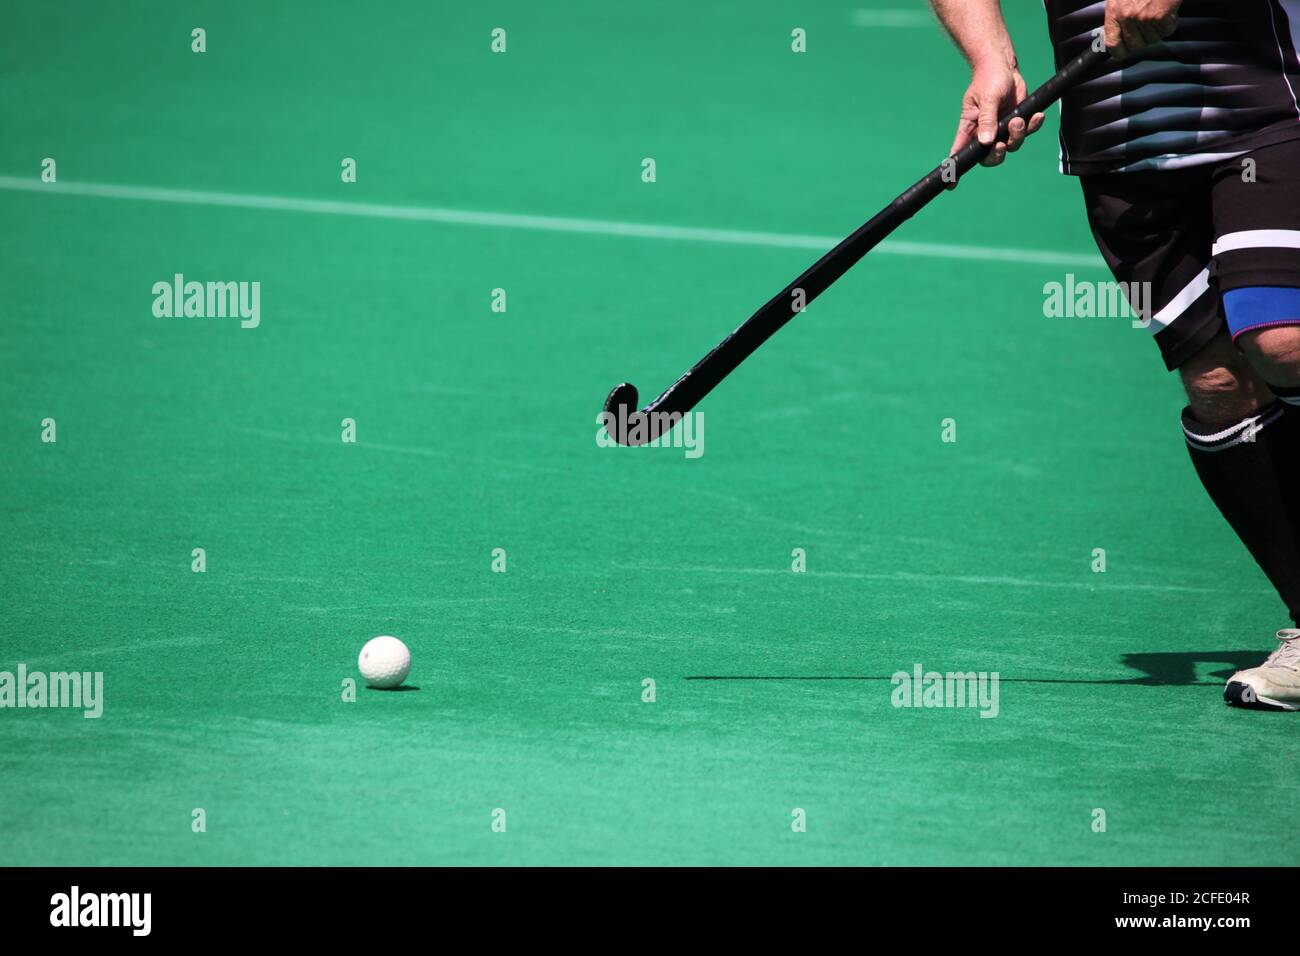 A field hockey player about to pass the ball Stock Photo